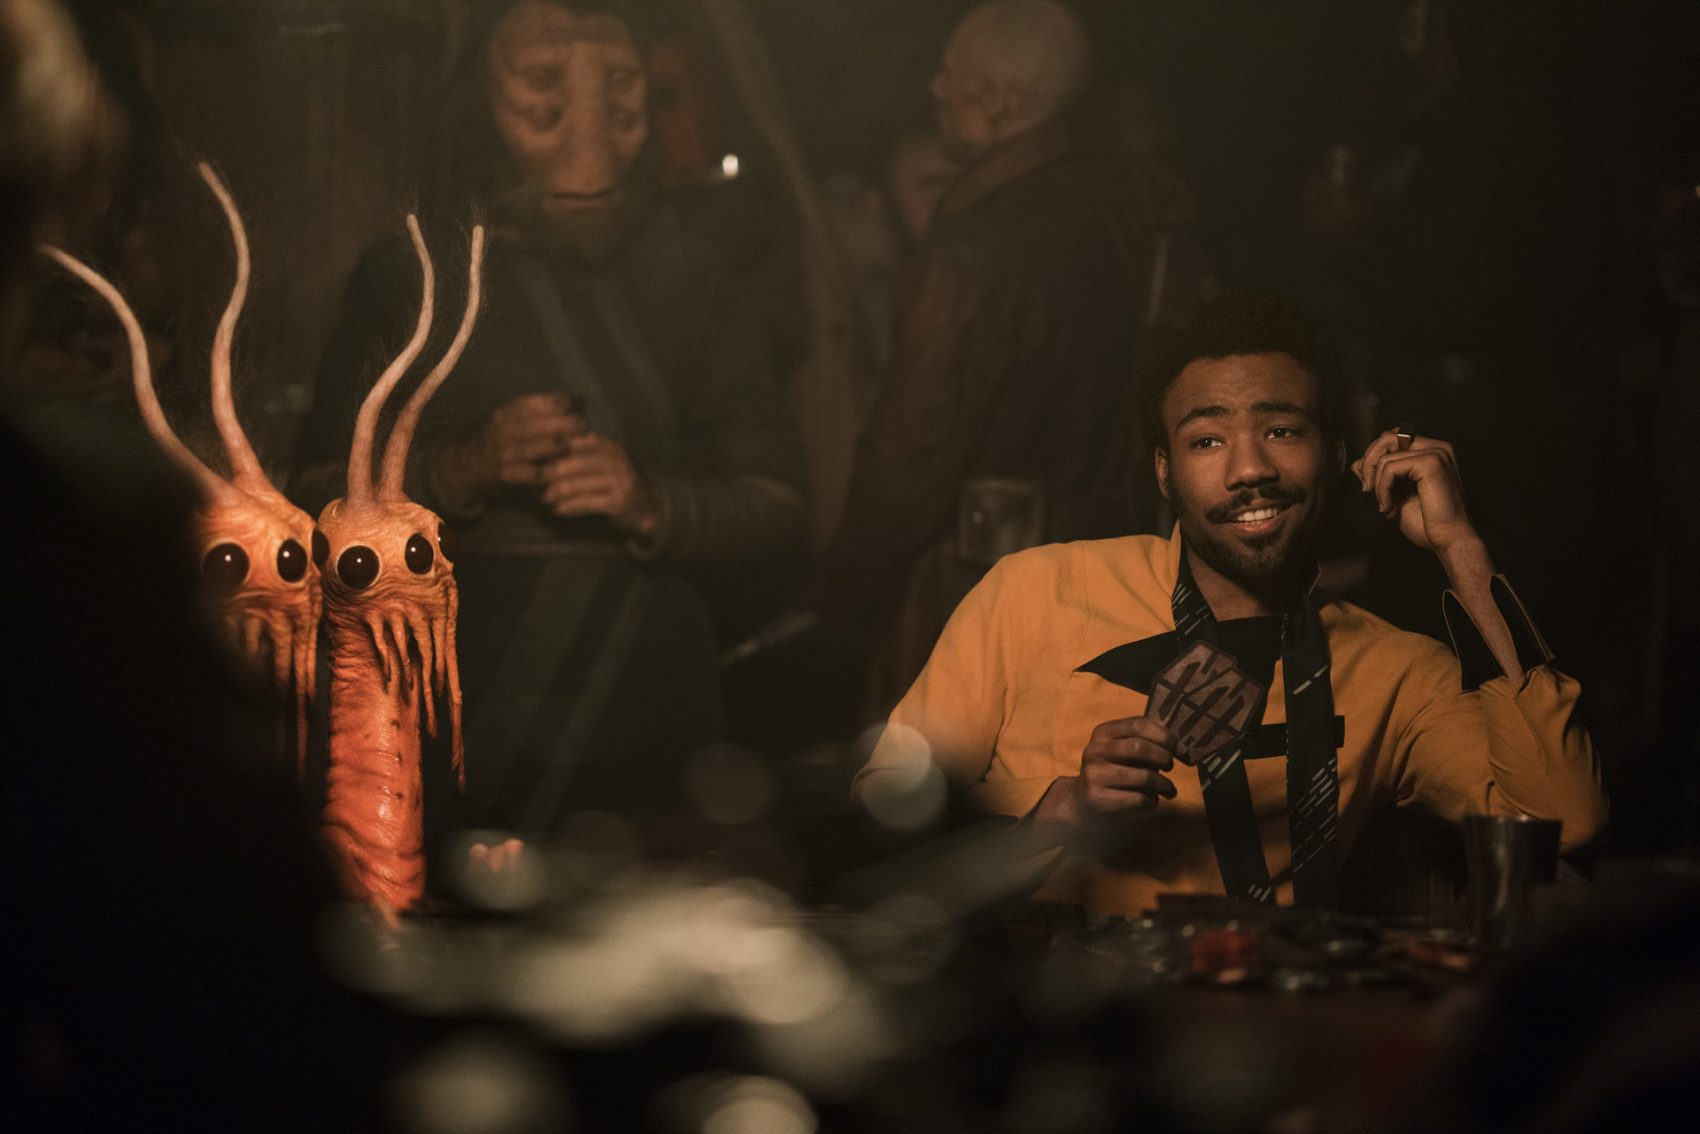 Donald Glover as the young Lando Calrissian in Solo A Star Wars Story (2018)